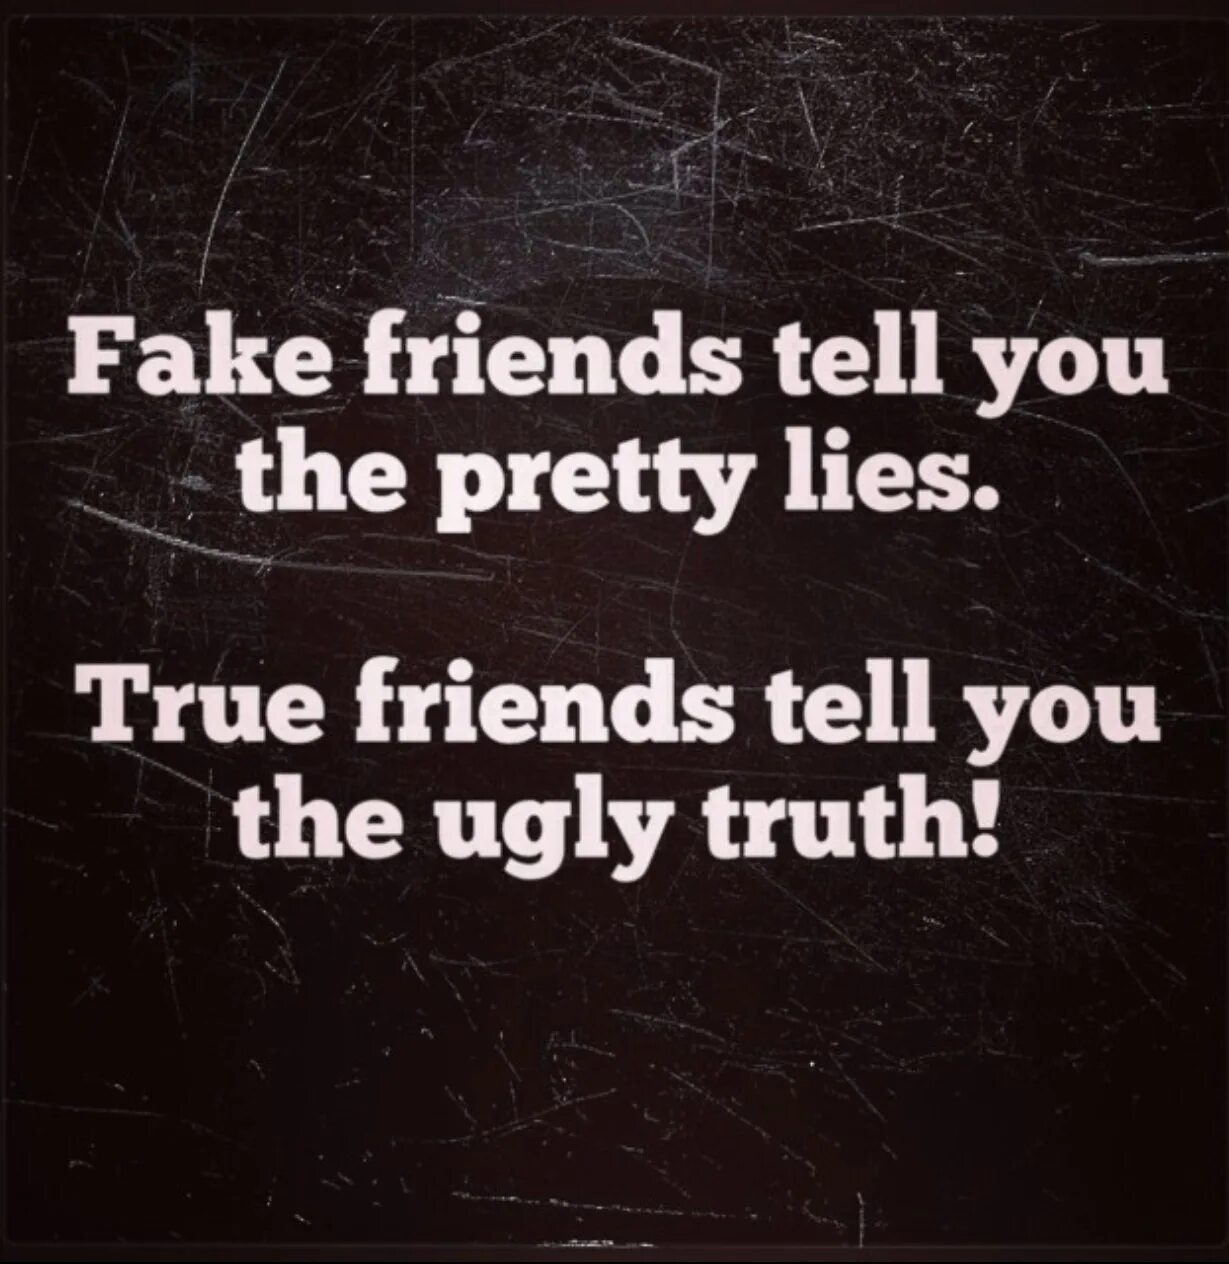 Pretty Lies ugly Truth. Pretty Lies ugly Truth толстовка. To tell you the Truth. He told me the truth